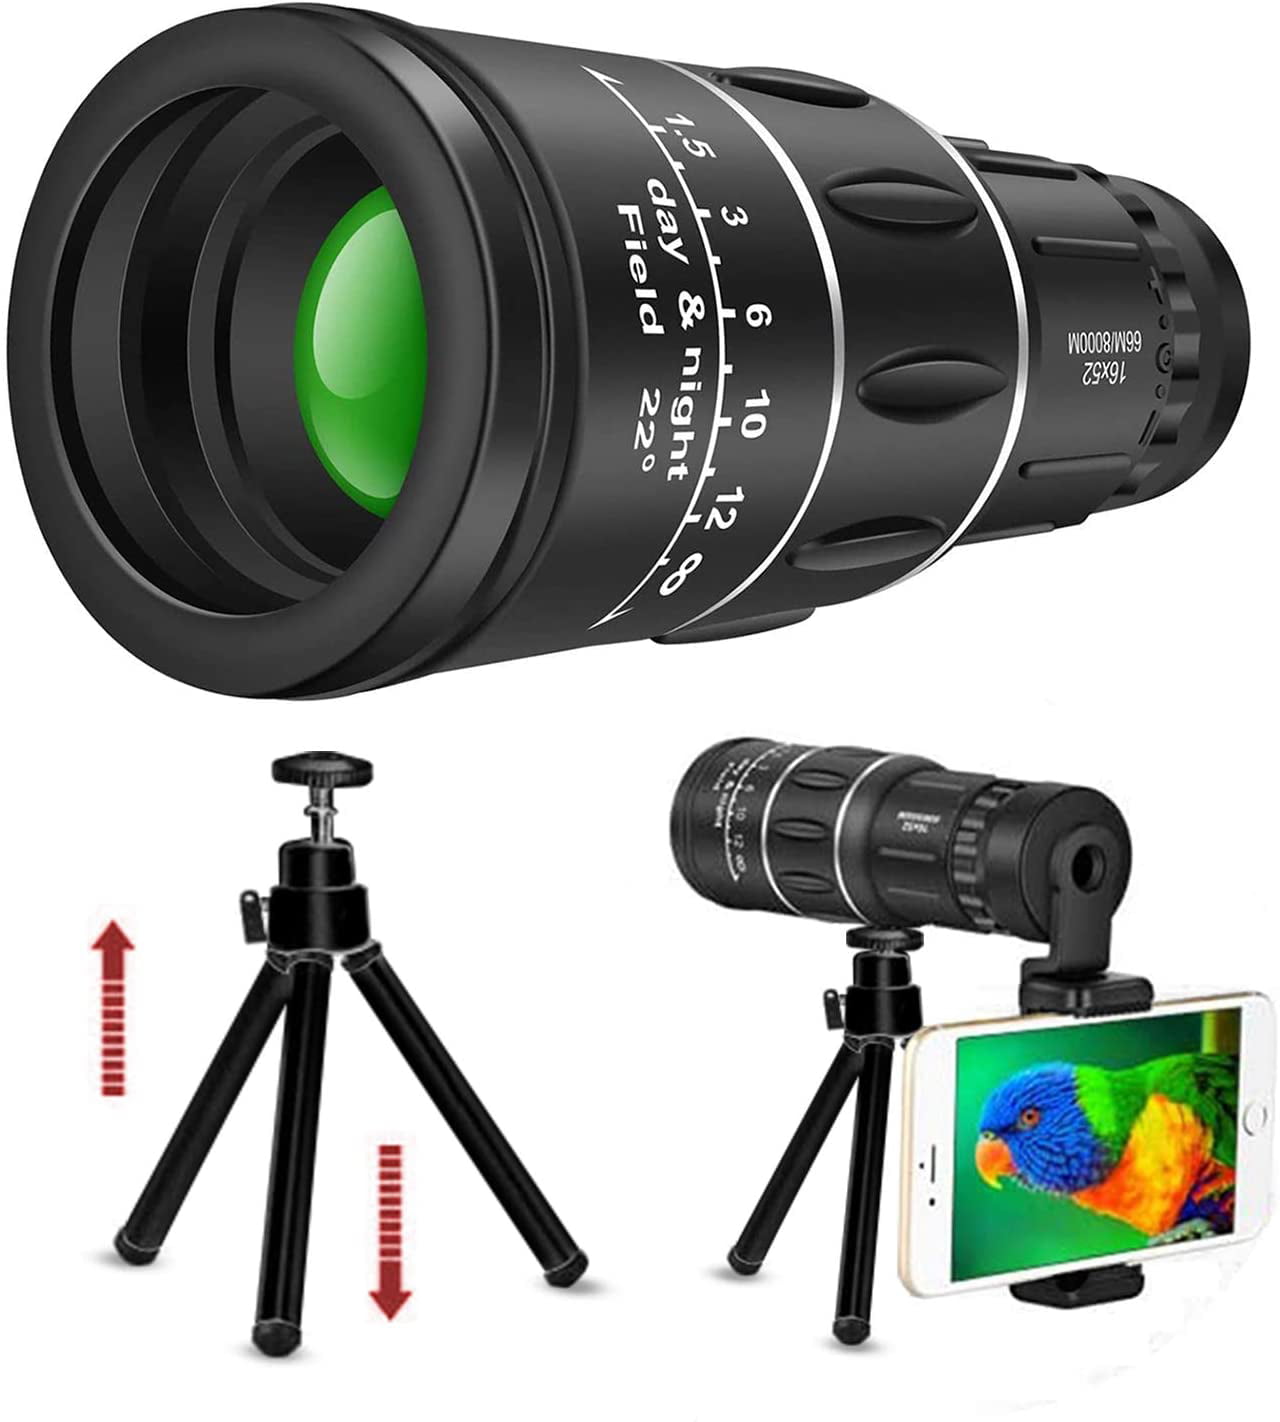 Upgrade 16x52 High Power HD Monocular with Smartphone Holder & Tripod, Waterproof Monocular with Durable and Clear FMC BAK4 Prism Dual Focus for Bird Watching Hiking Camping Monocular Telescope 